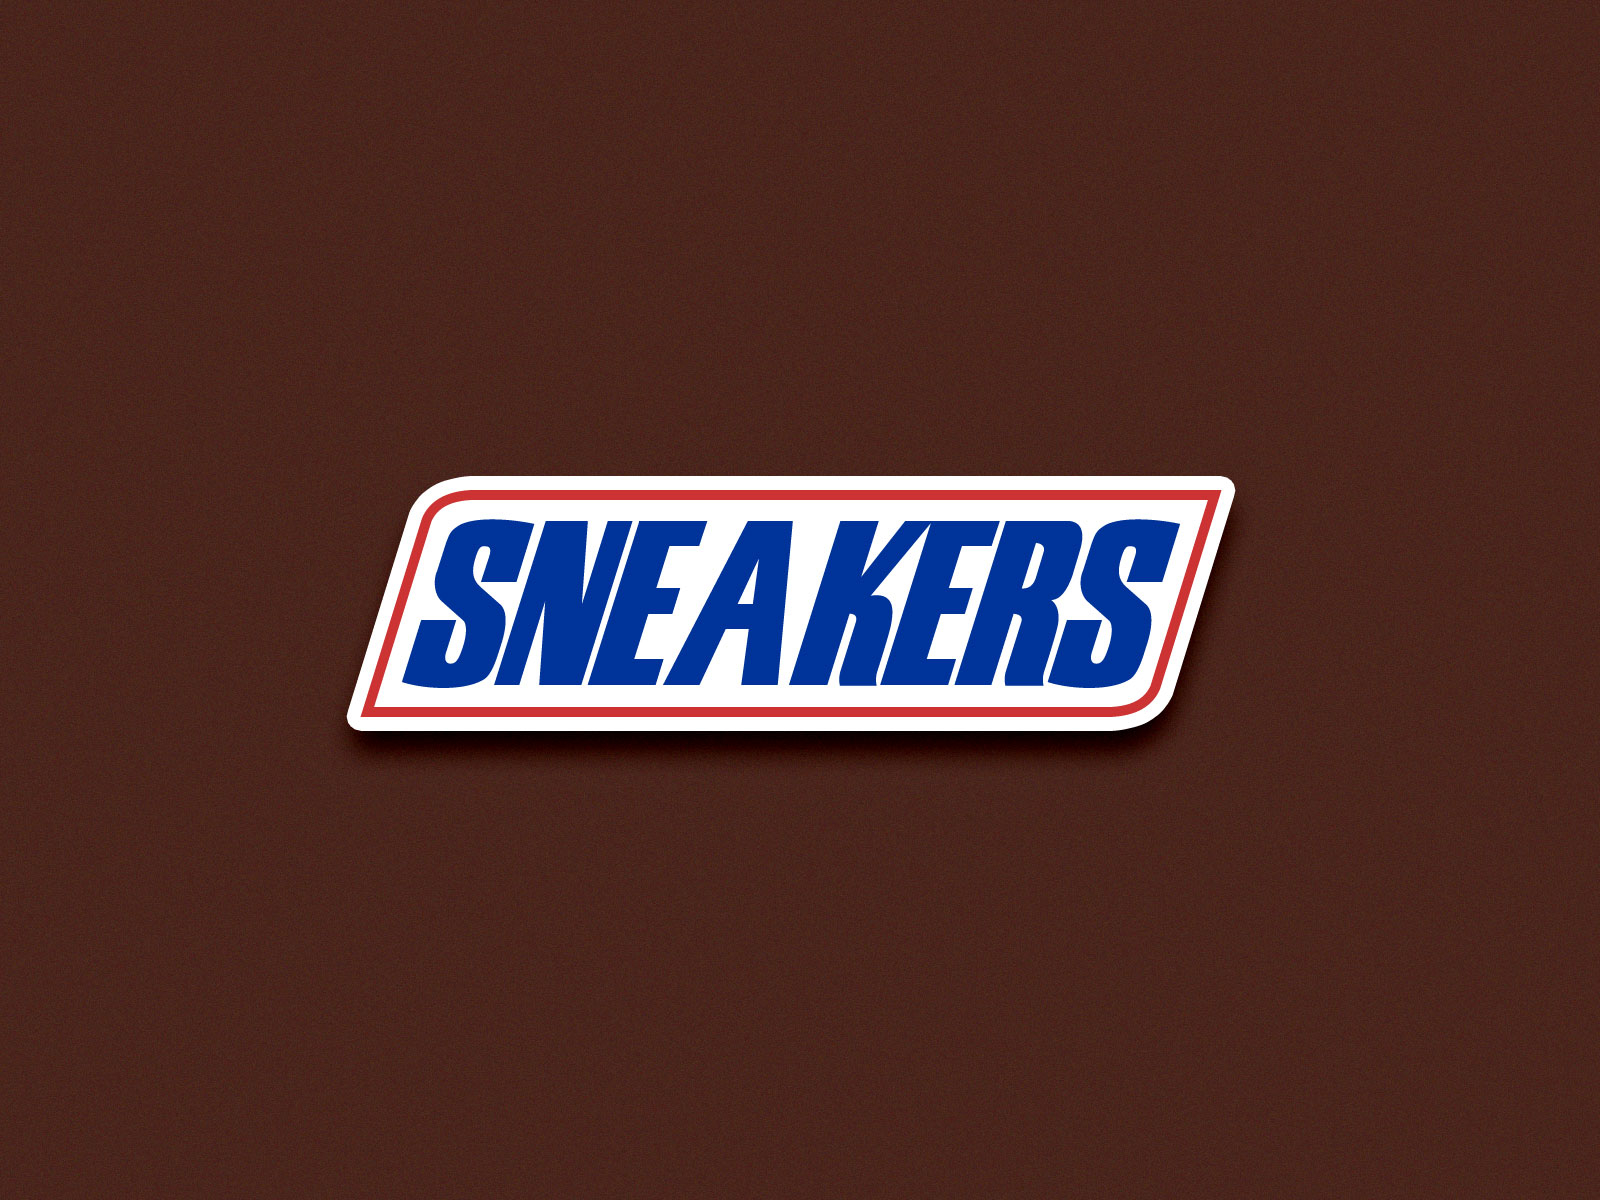 Snickers | A Custom Shoe concept by Brandon Cleary